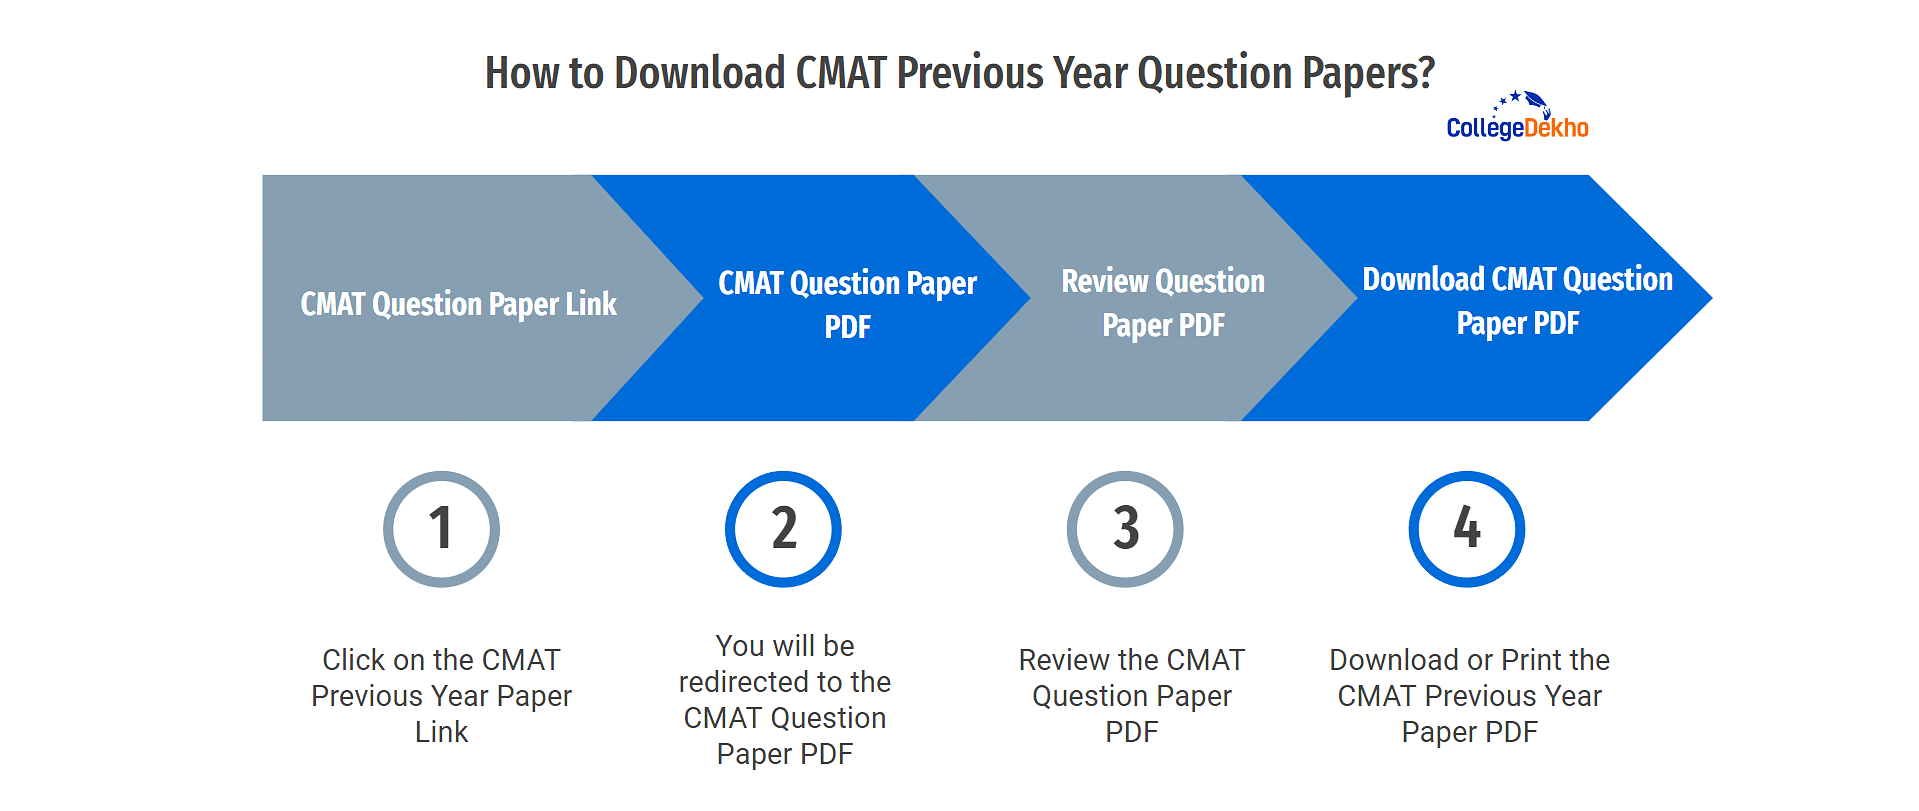 How to Download CMAT Previous Year Question Papers